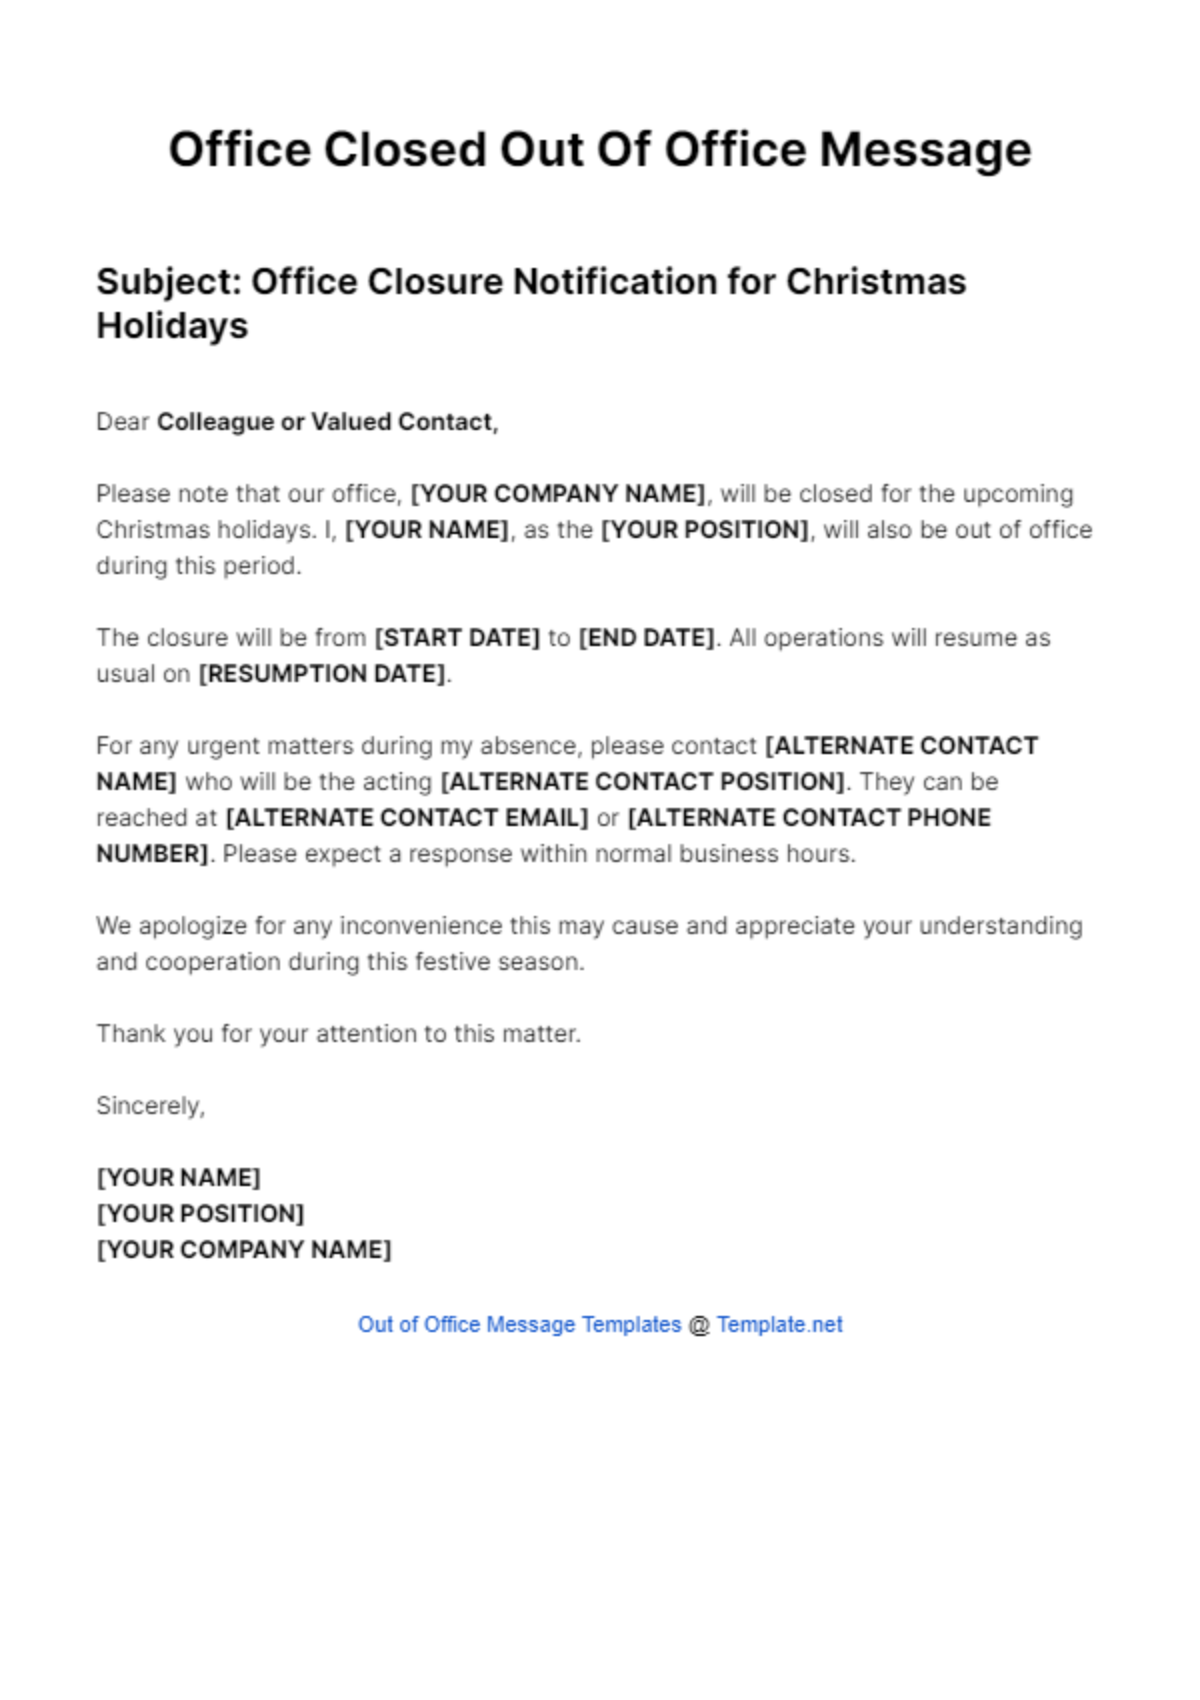 Office Closed Out Of Office Message Template